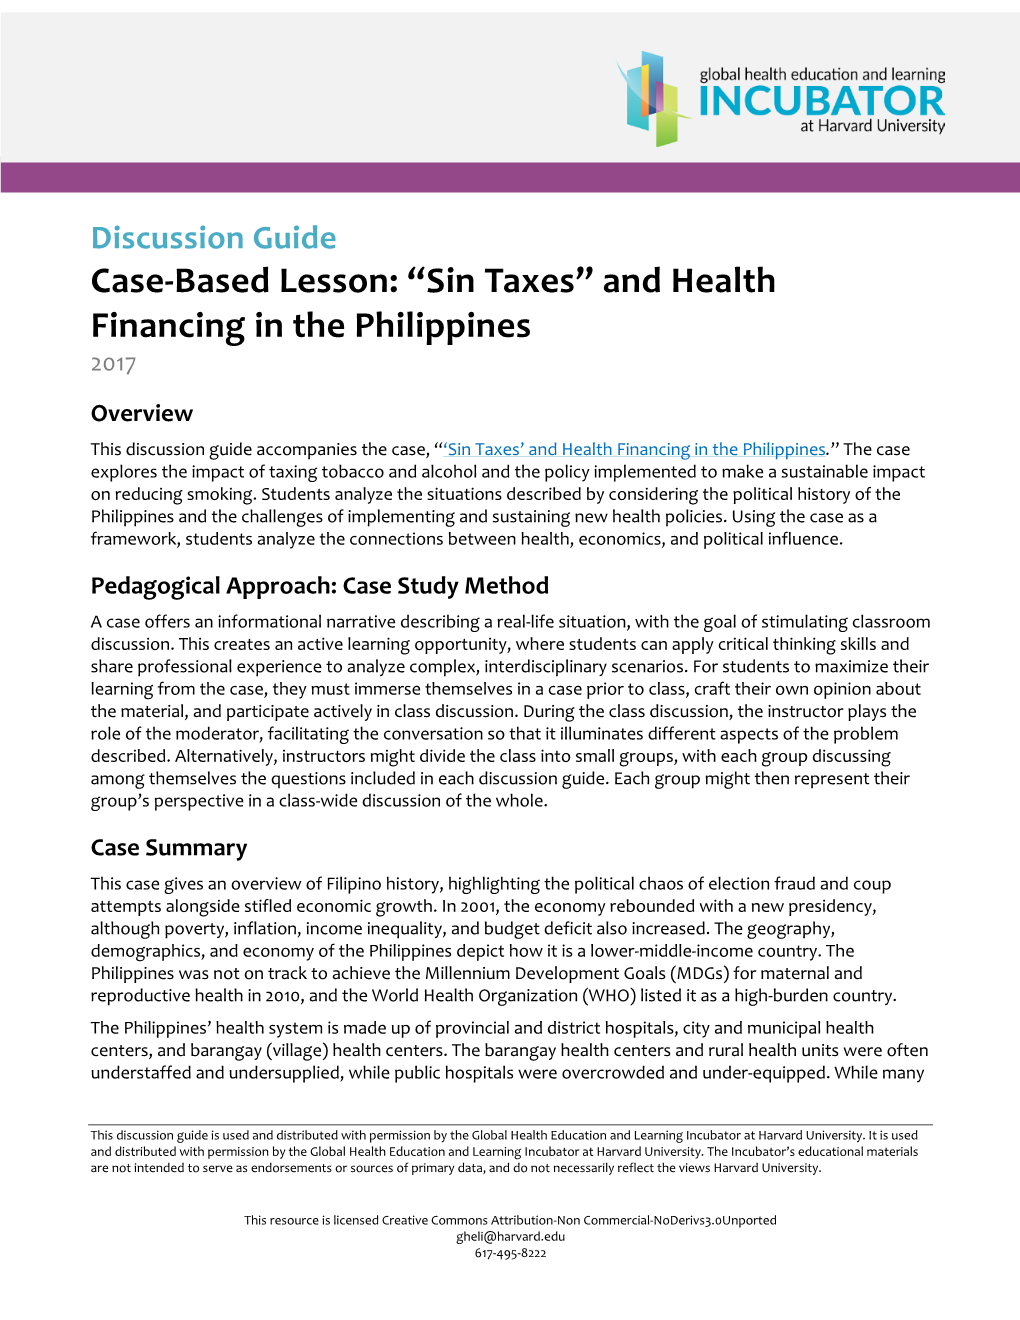 Case-Based Lesson: “Sin Taxes” and Health Financing in the Philippines 2017